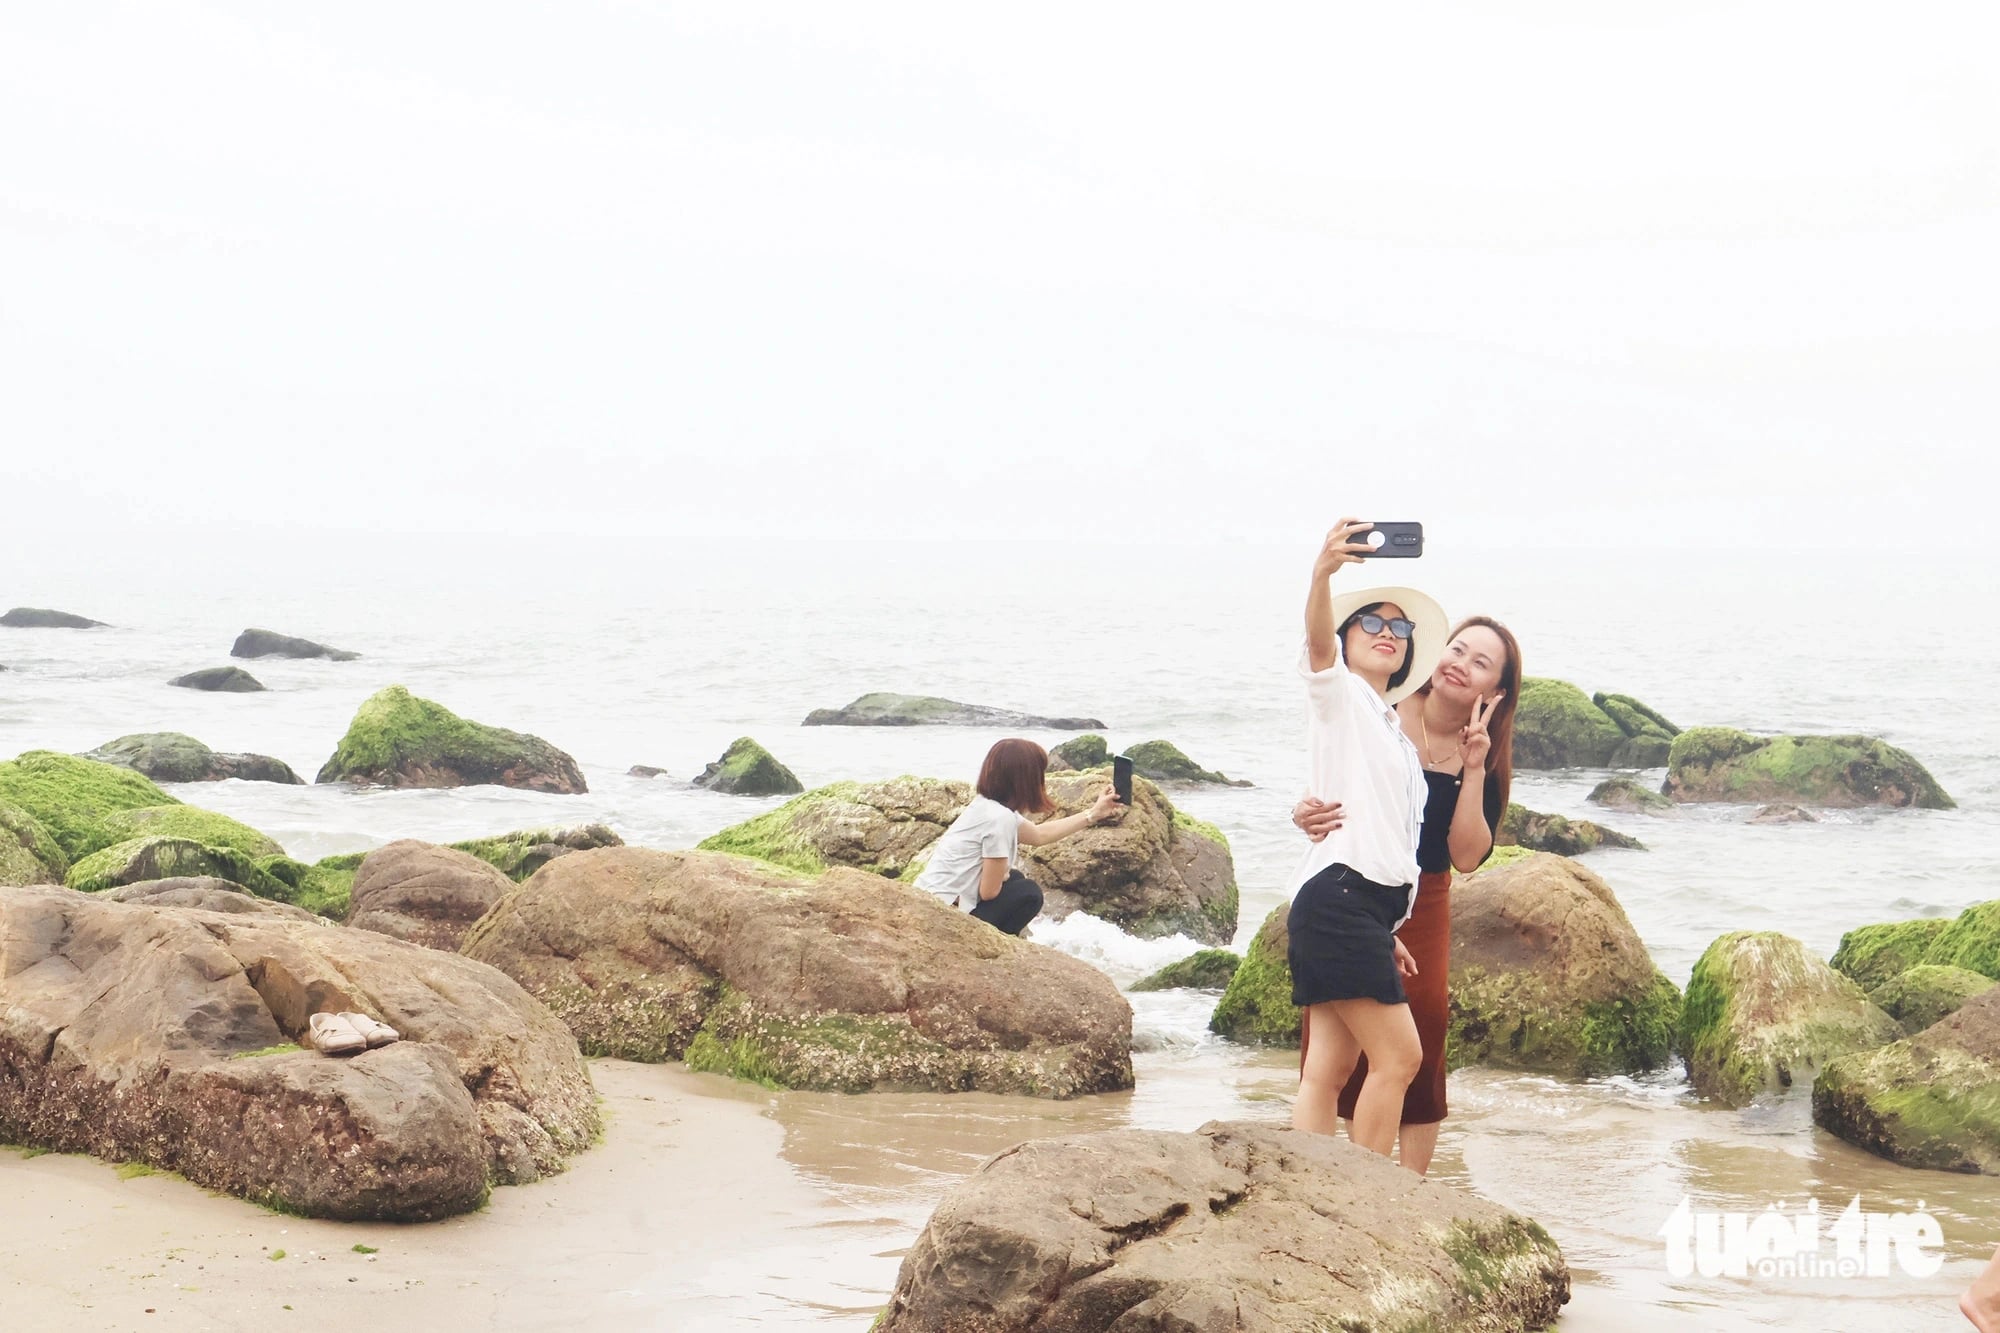 Tourists take photos while visiting a moss-covered reef at Nam O Beach, Lien Chieu District, Da Nang City, central Vietnam in this illustration photo. Photo: Le Trung / Tuoi Tre